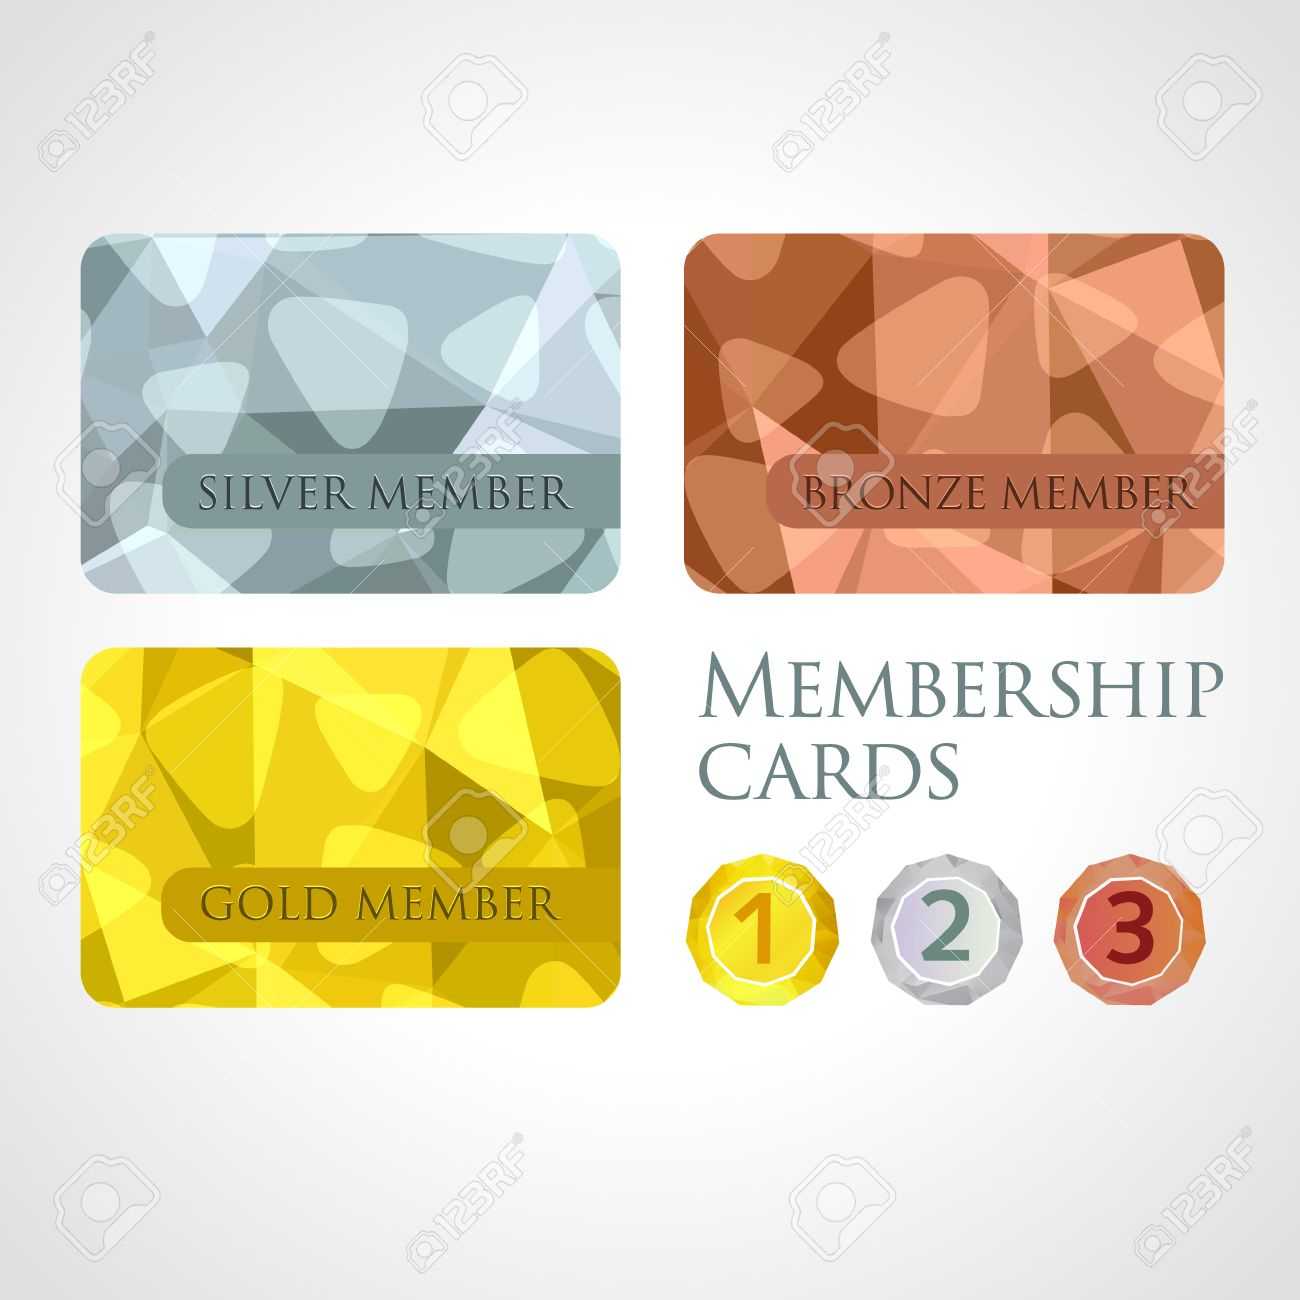 Gold, Silver And Bronze Membership Cards Or Backgrounds And Medals Set In  Polygonal Style. Gift, Voucher, Certificate Template, Vector Illustration Within Template For Membership Cards